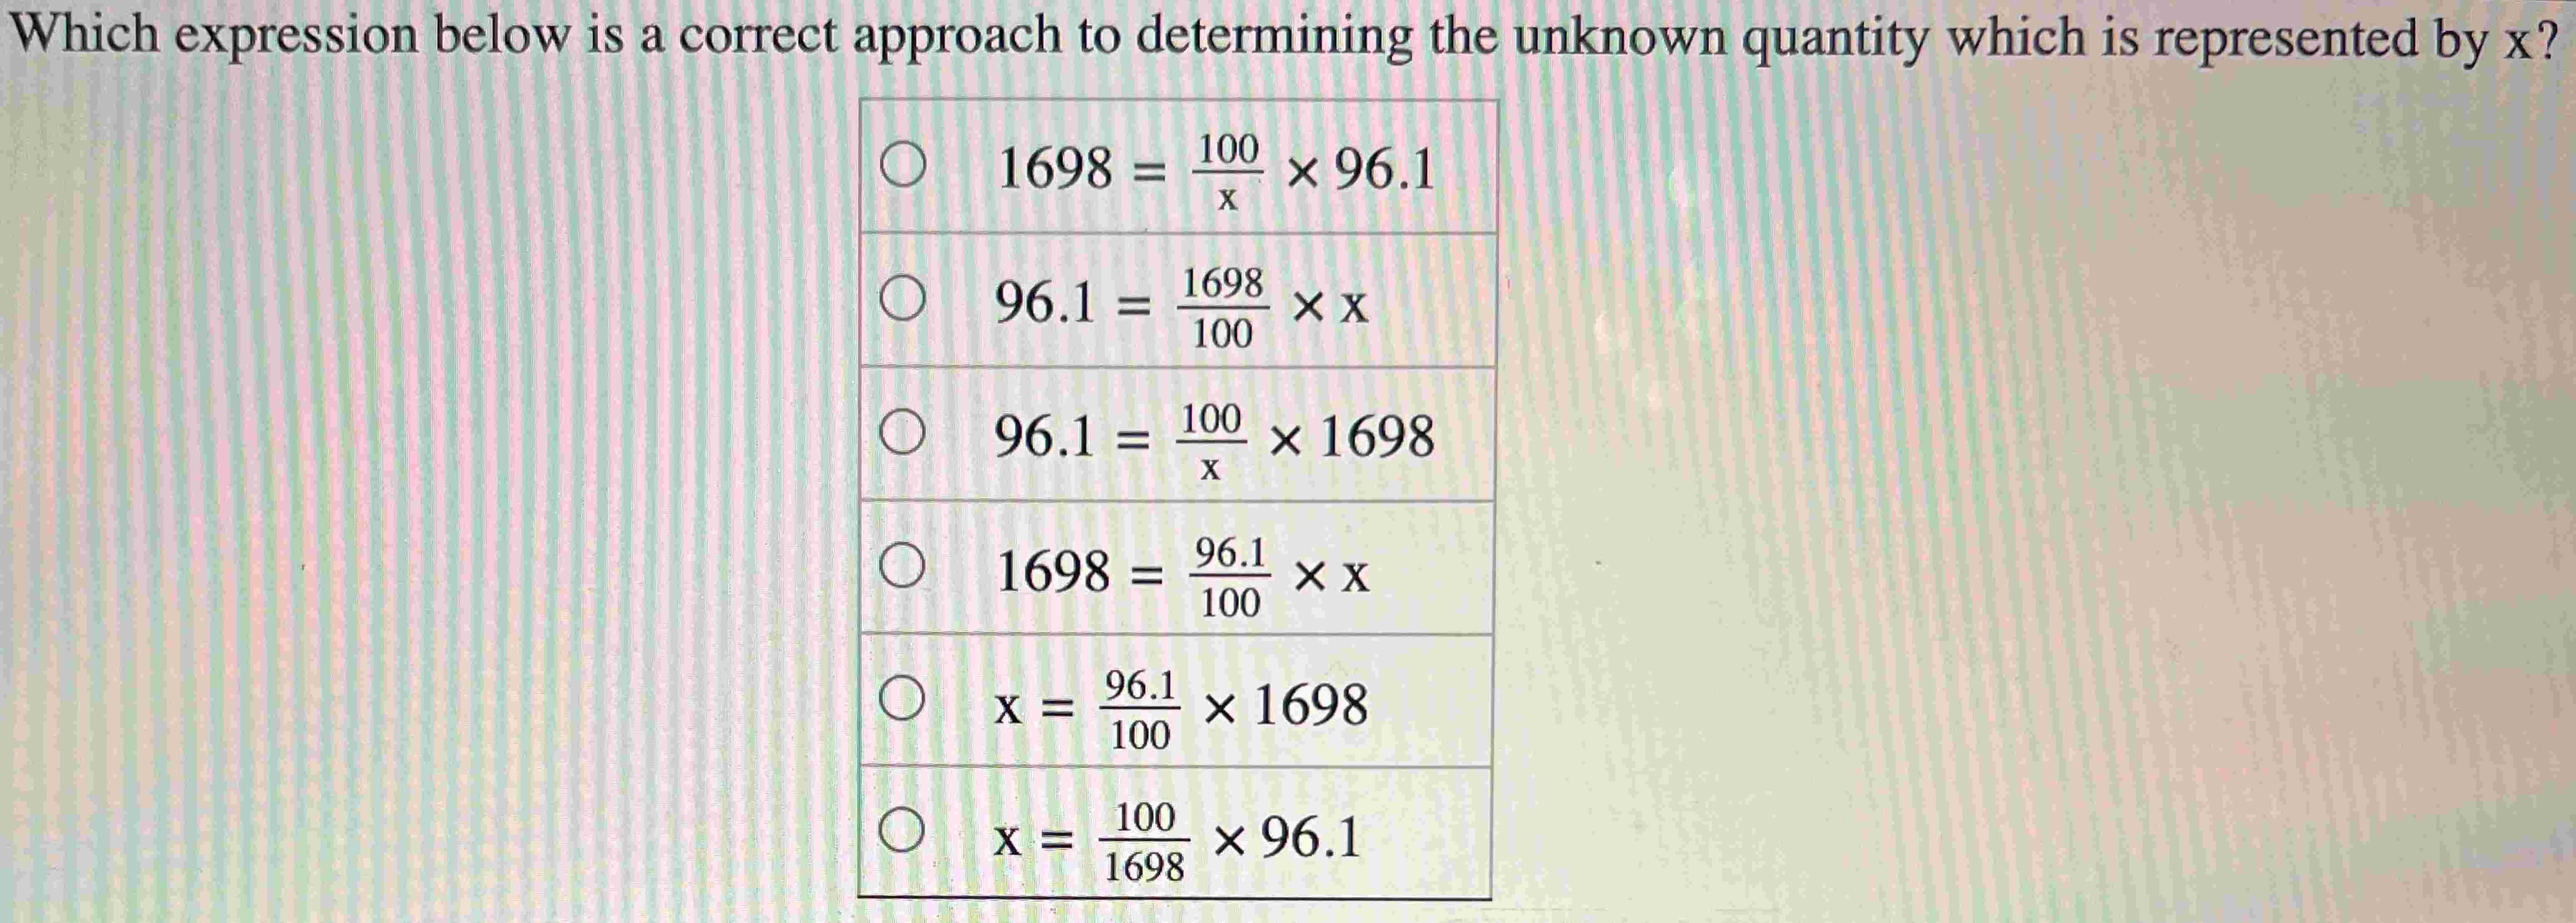 Which expression below is a correct approach to determining the unknown quantity which is represented by x? O